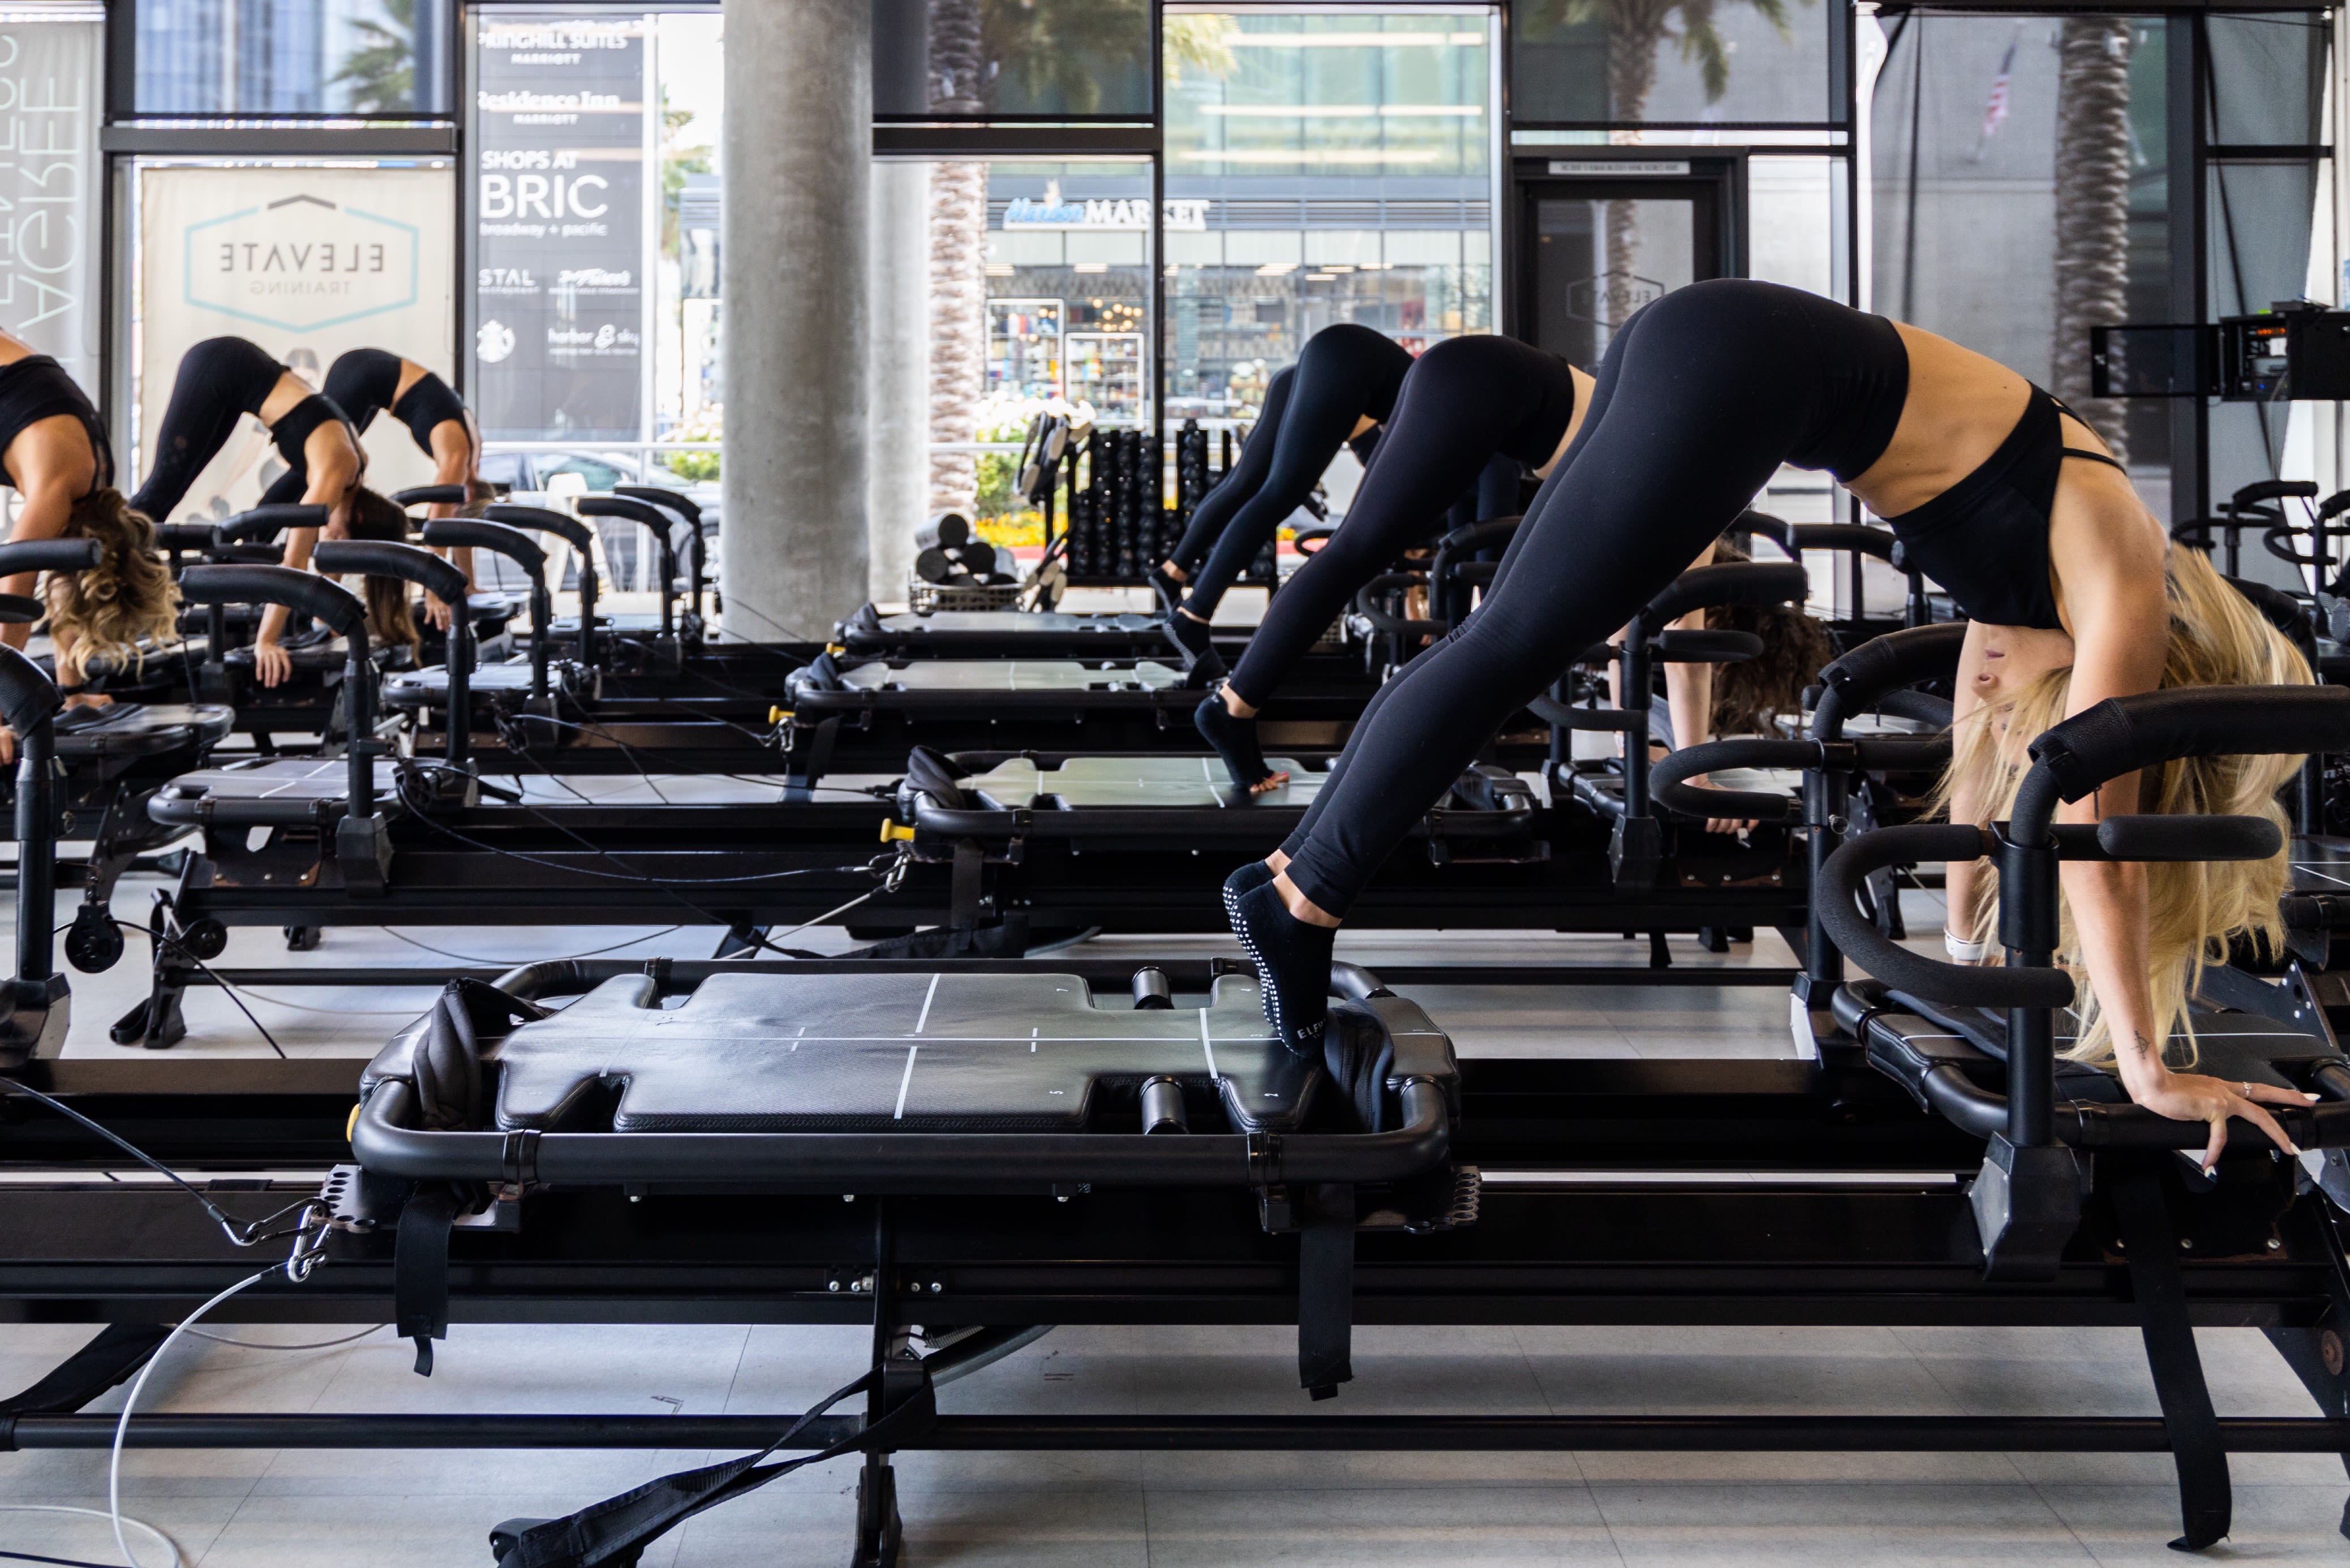 Elevate Training - Downtown: Read Reviews and Book Classes on ClassPass